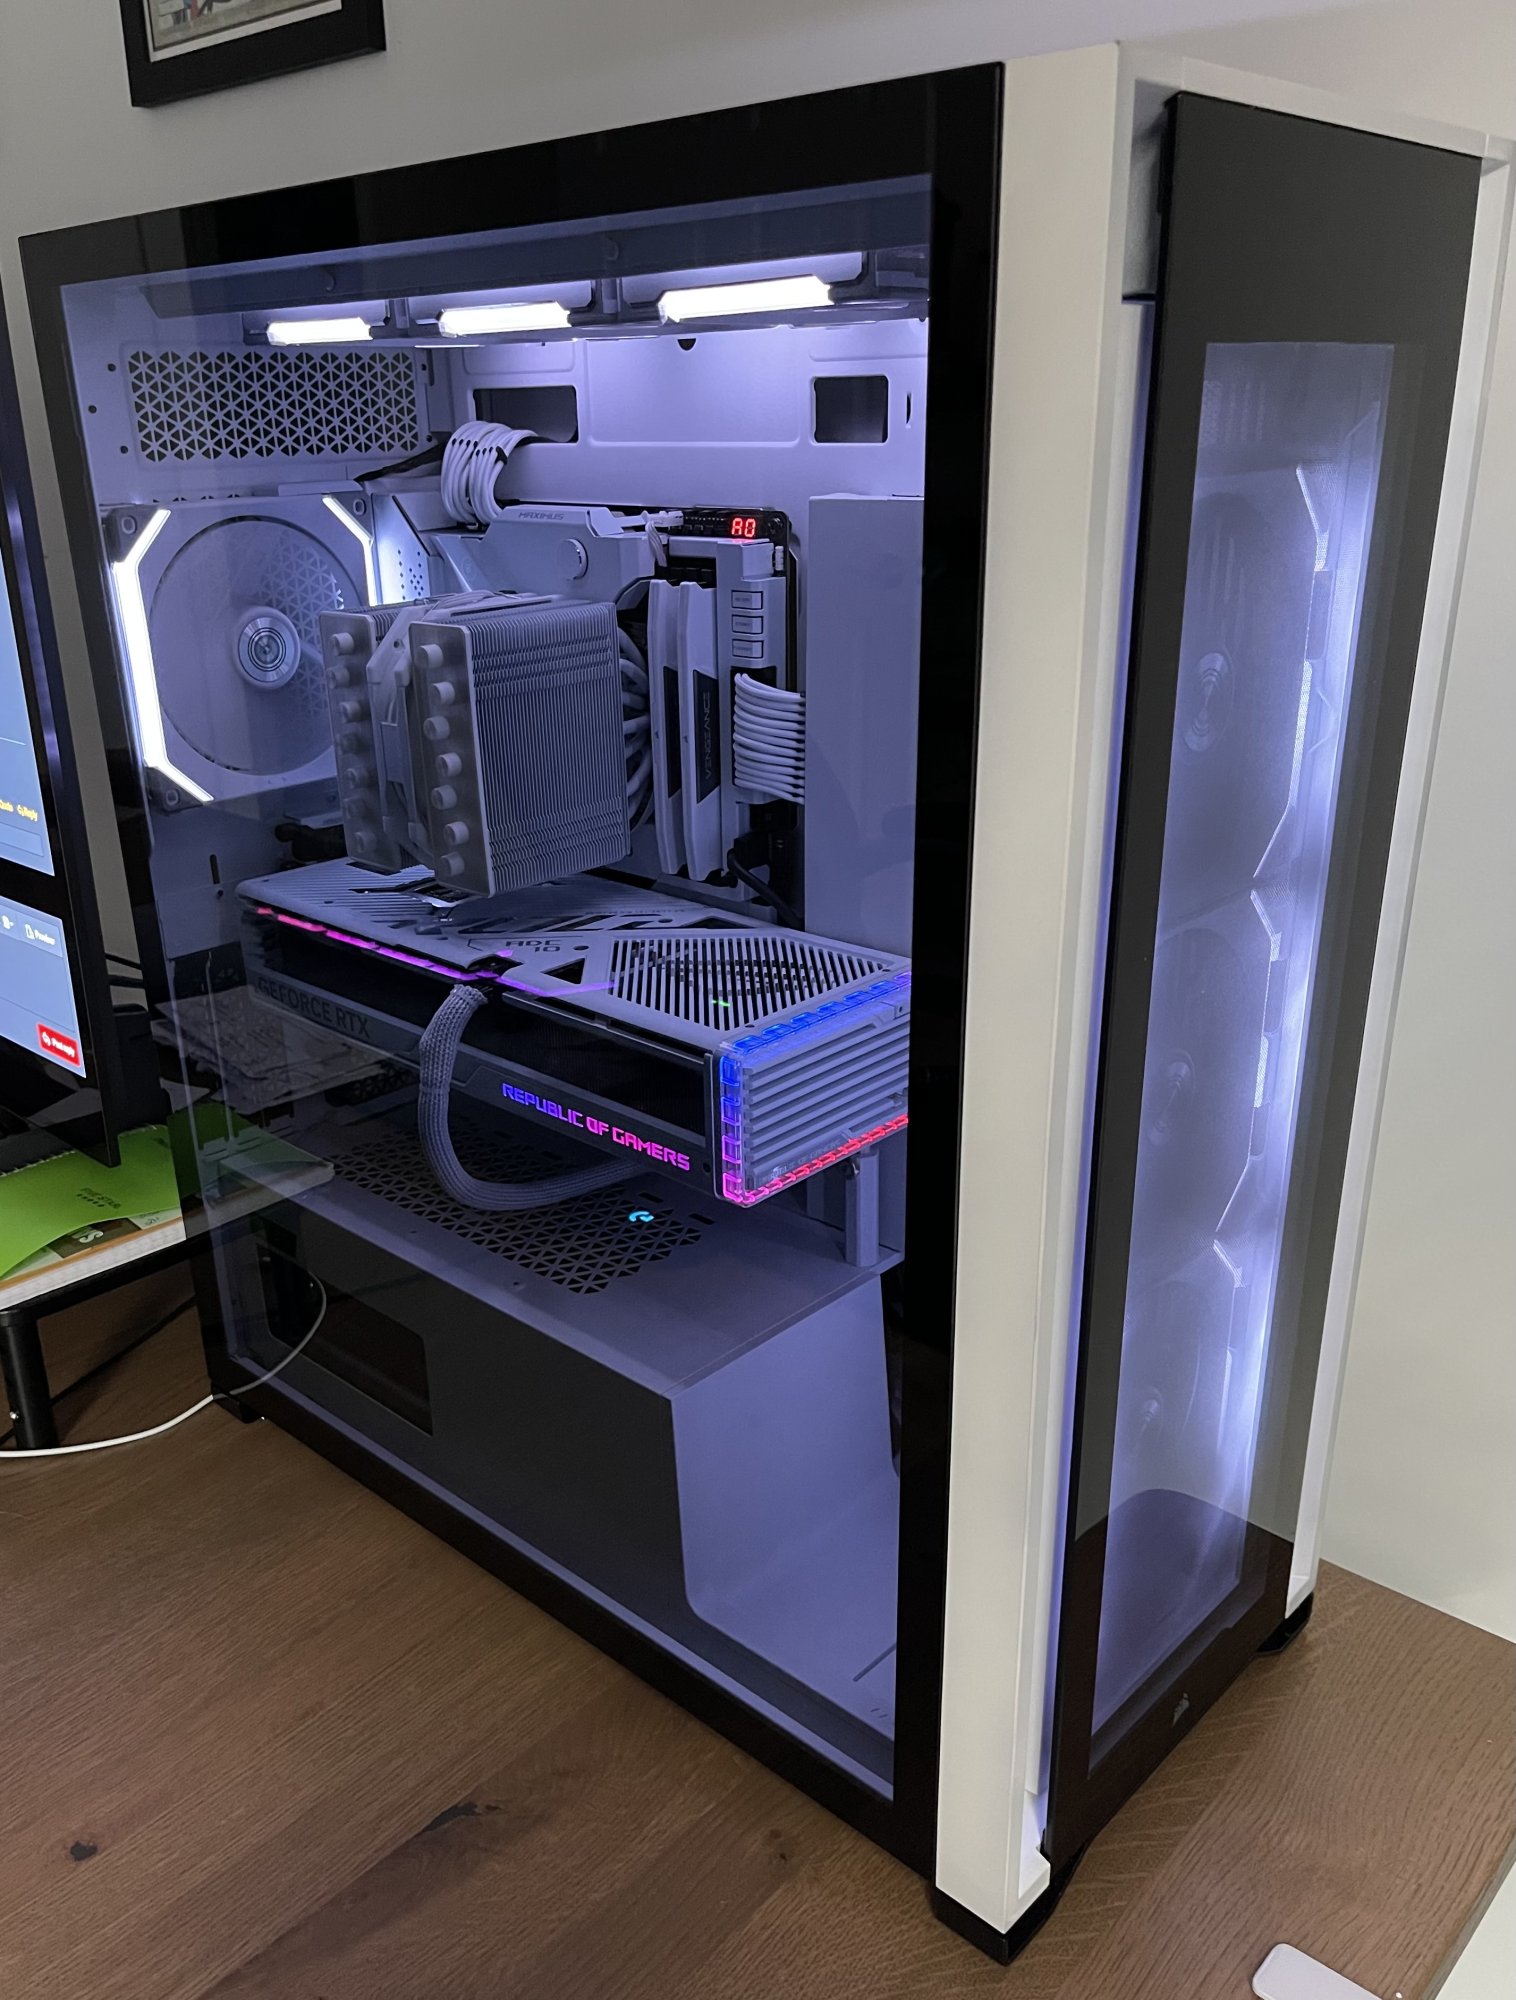 Post Your Workstations 2023 | Page 2 | [H]ard|Forum